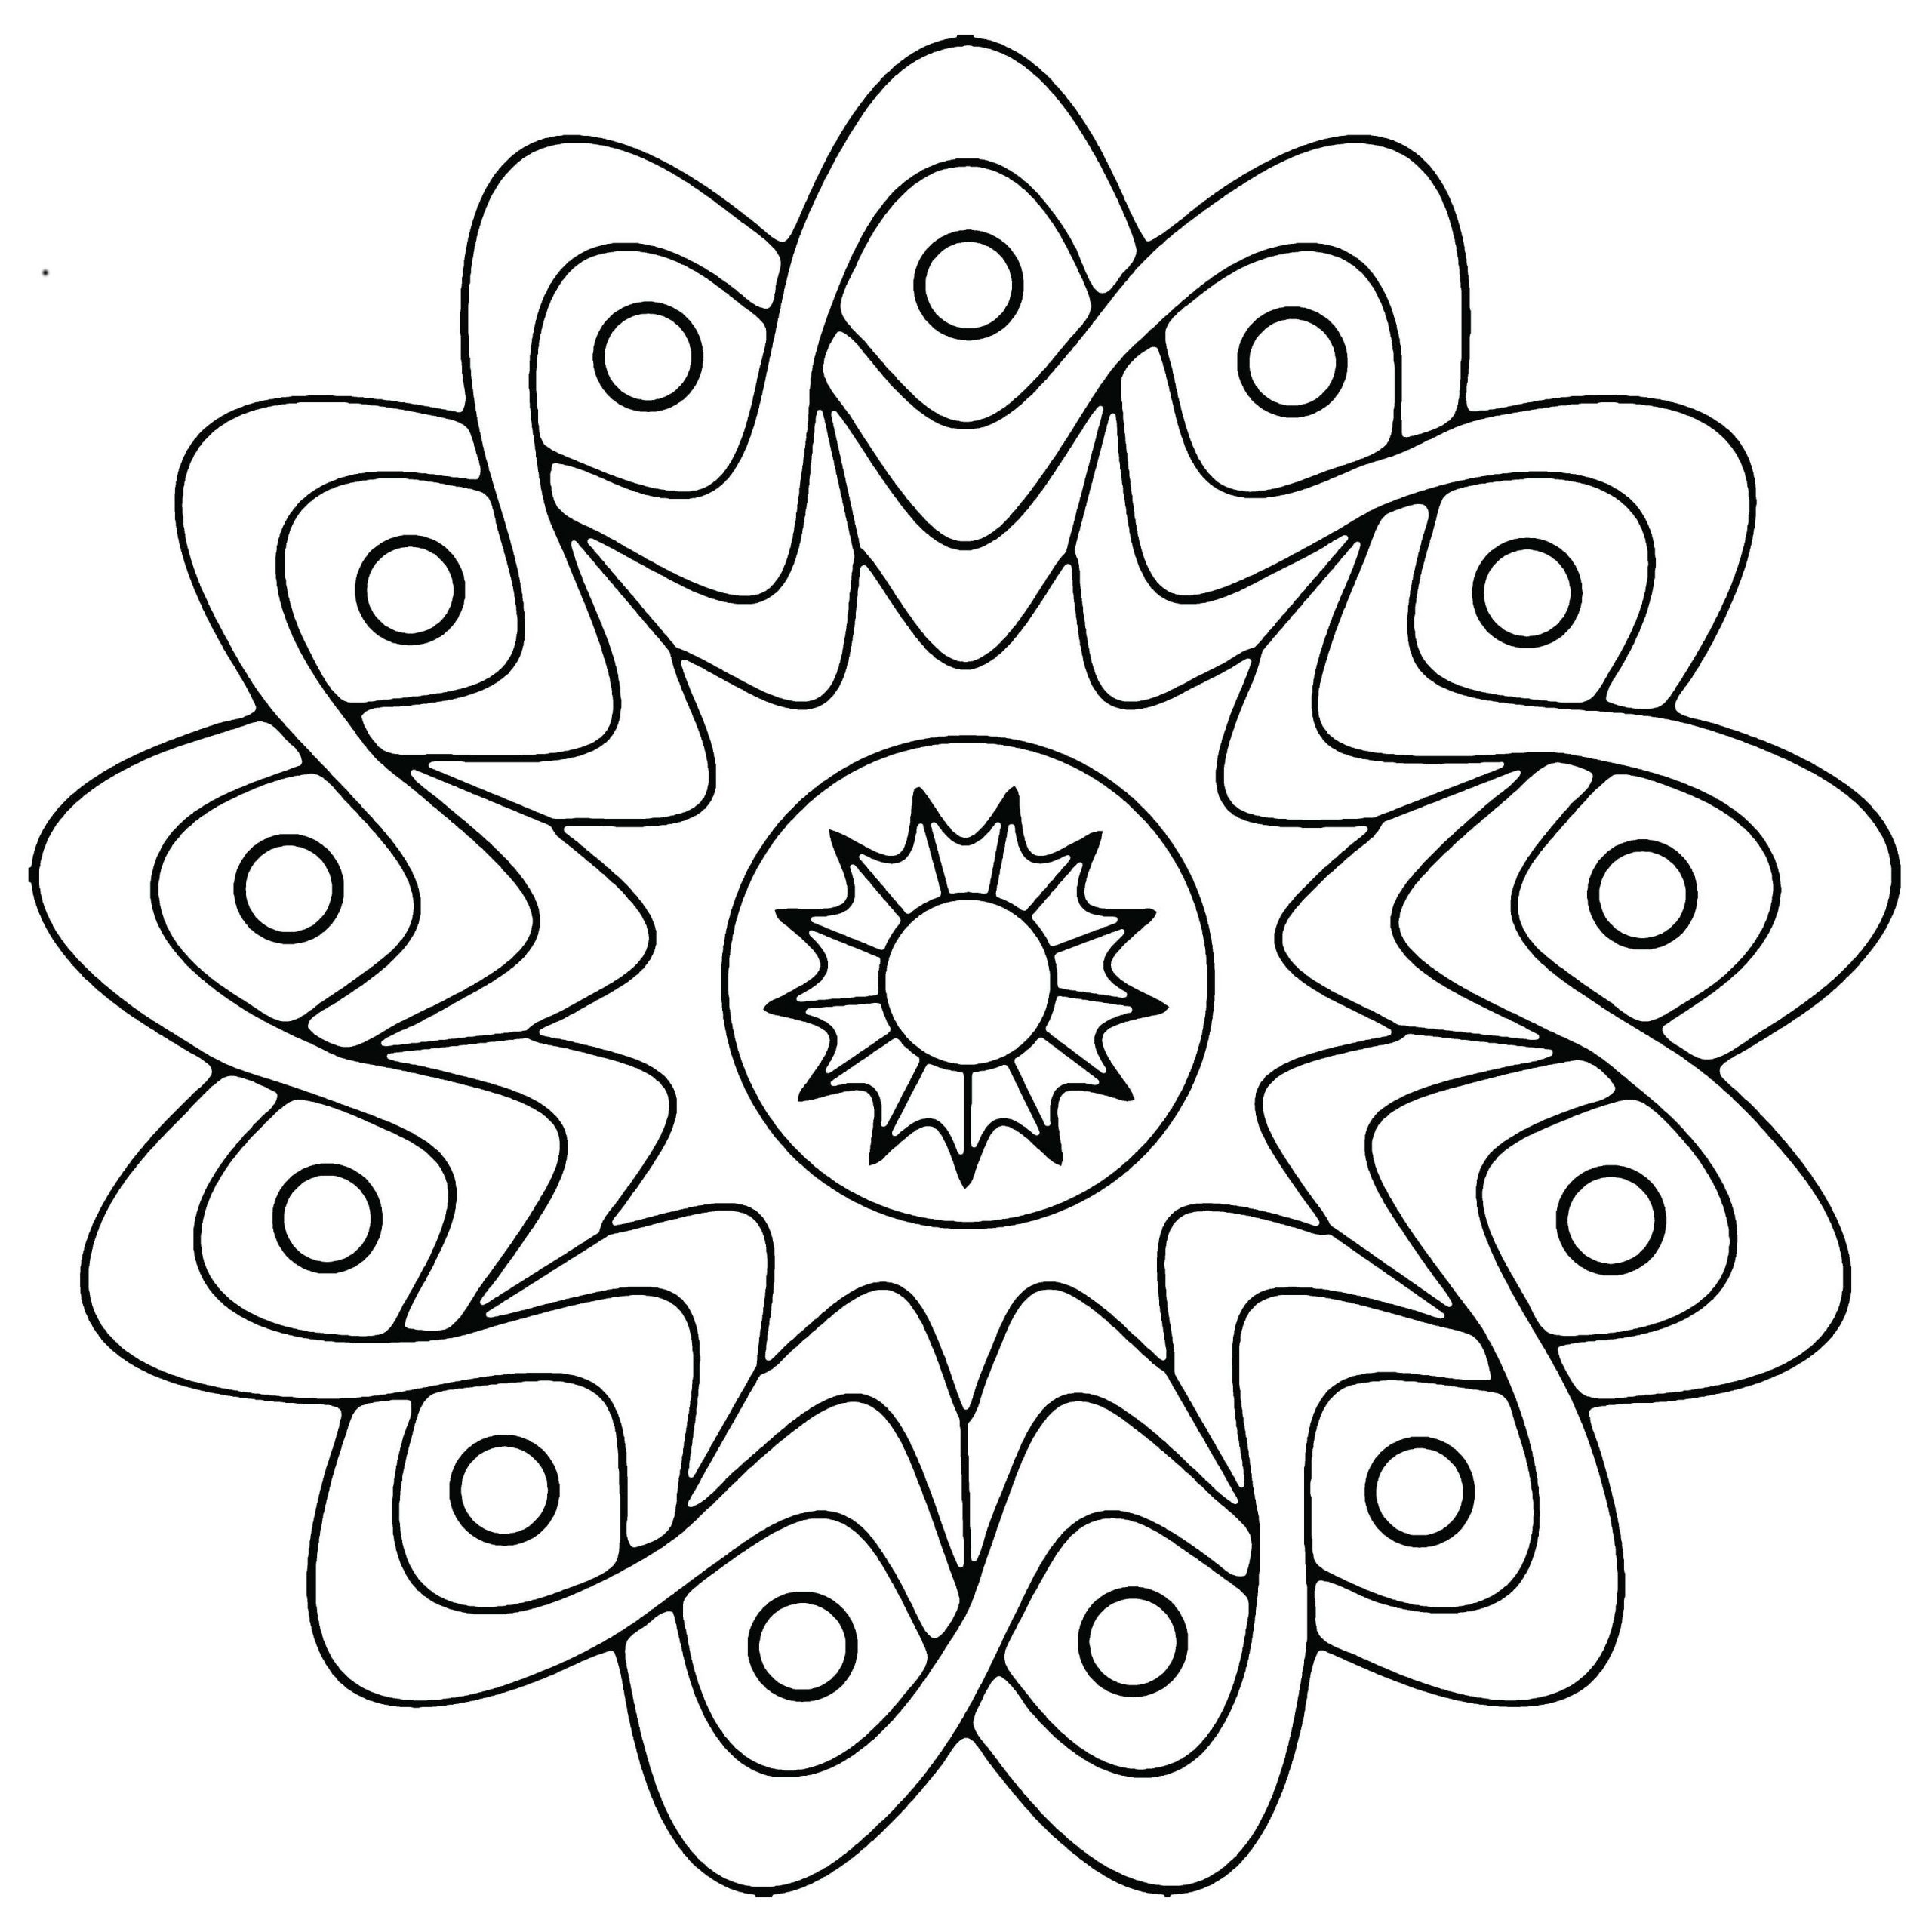 Easy Mandala Coloring Pages Coloring Pattern